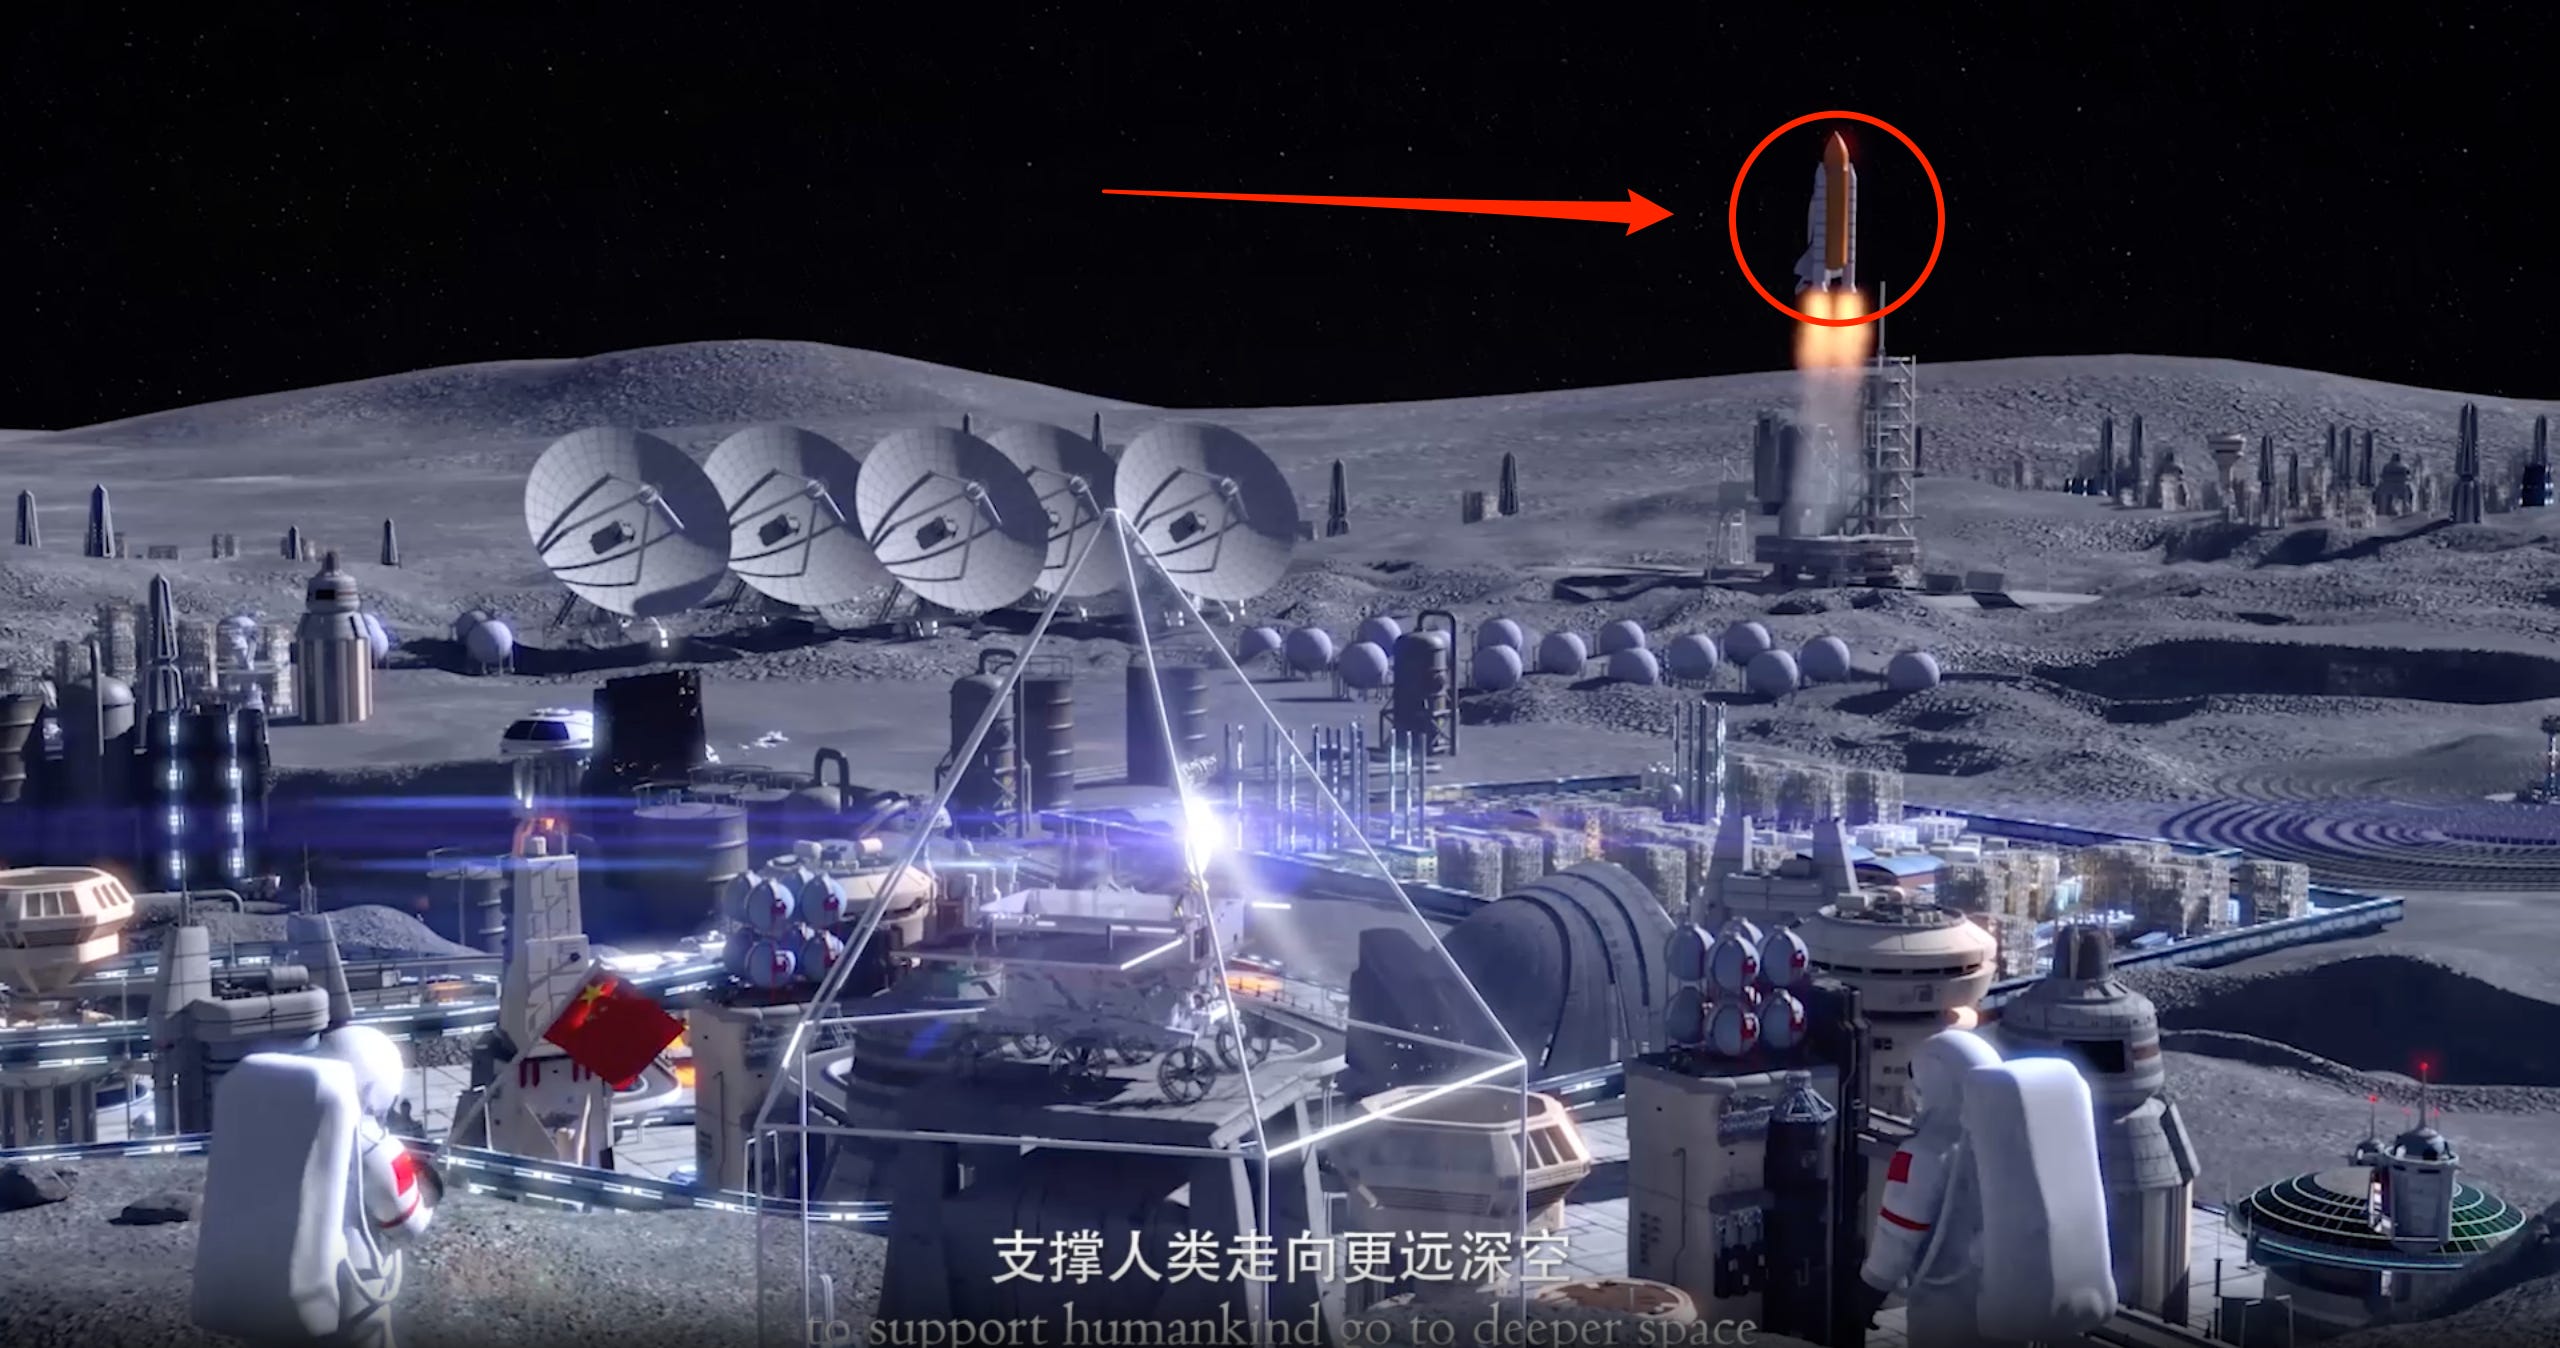 microsoft, china's hype video for its lunar base showed what looked like a nasa space shuttle lifting off, which it then realized and tried to fix